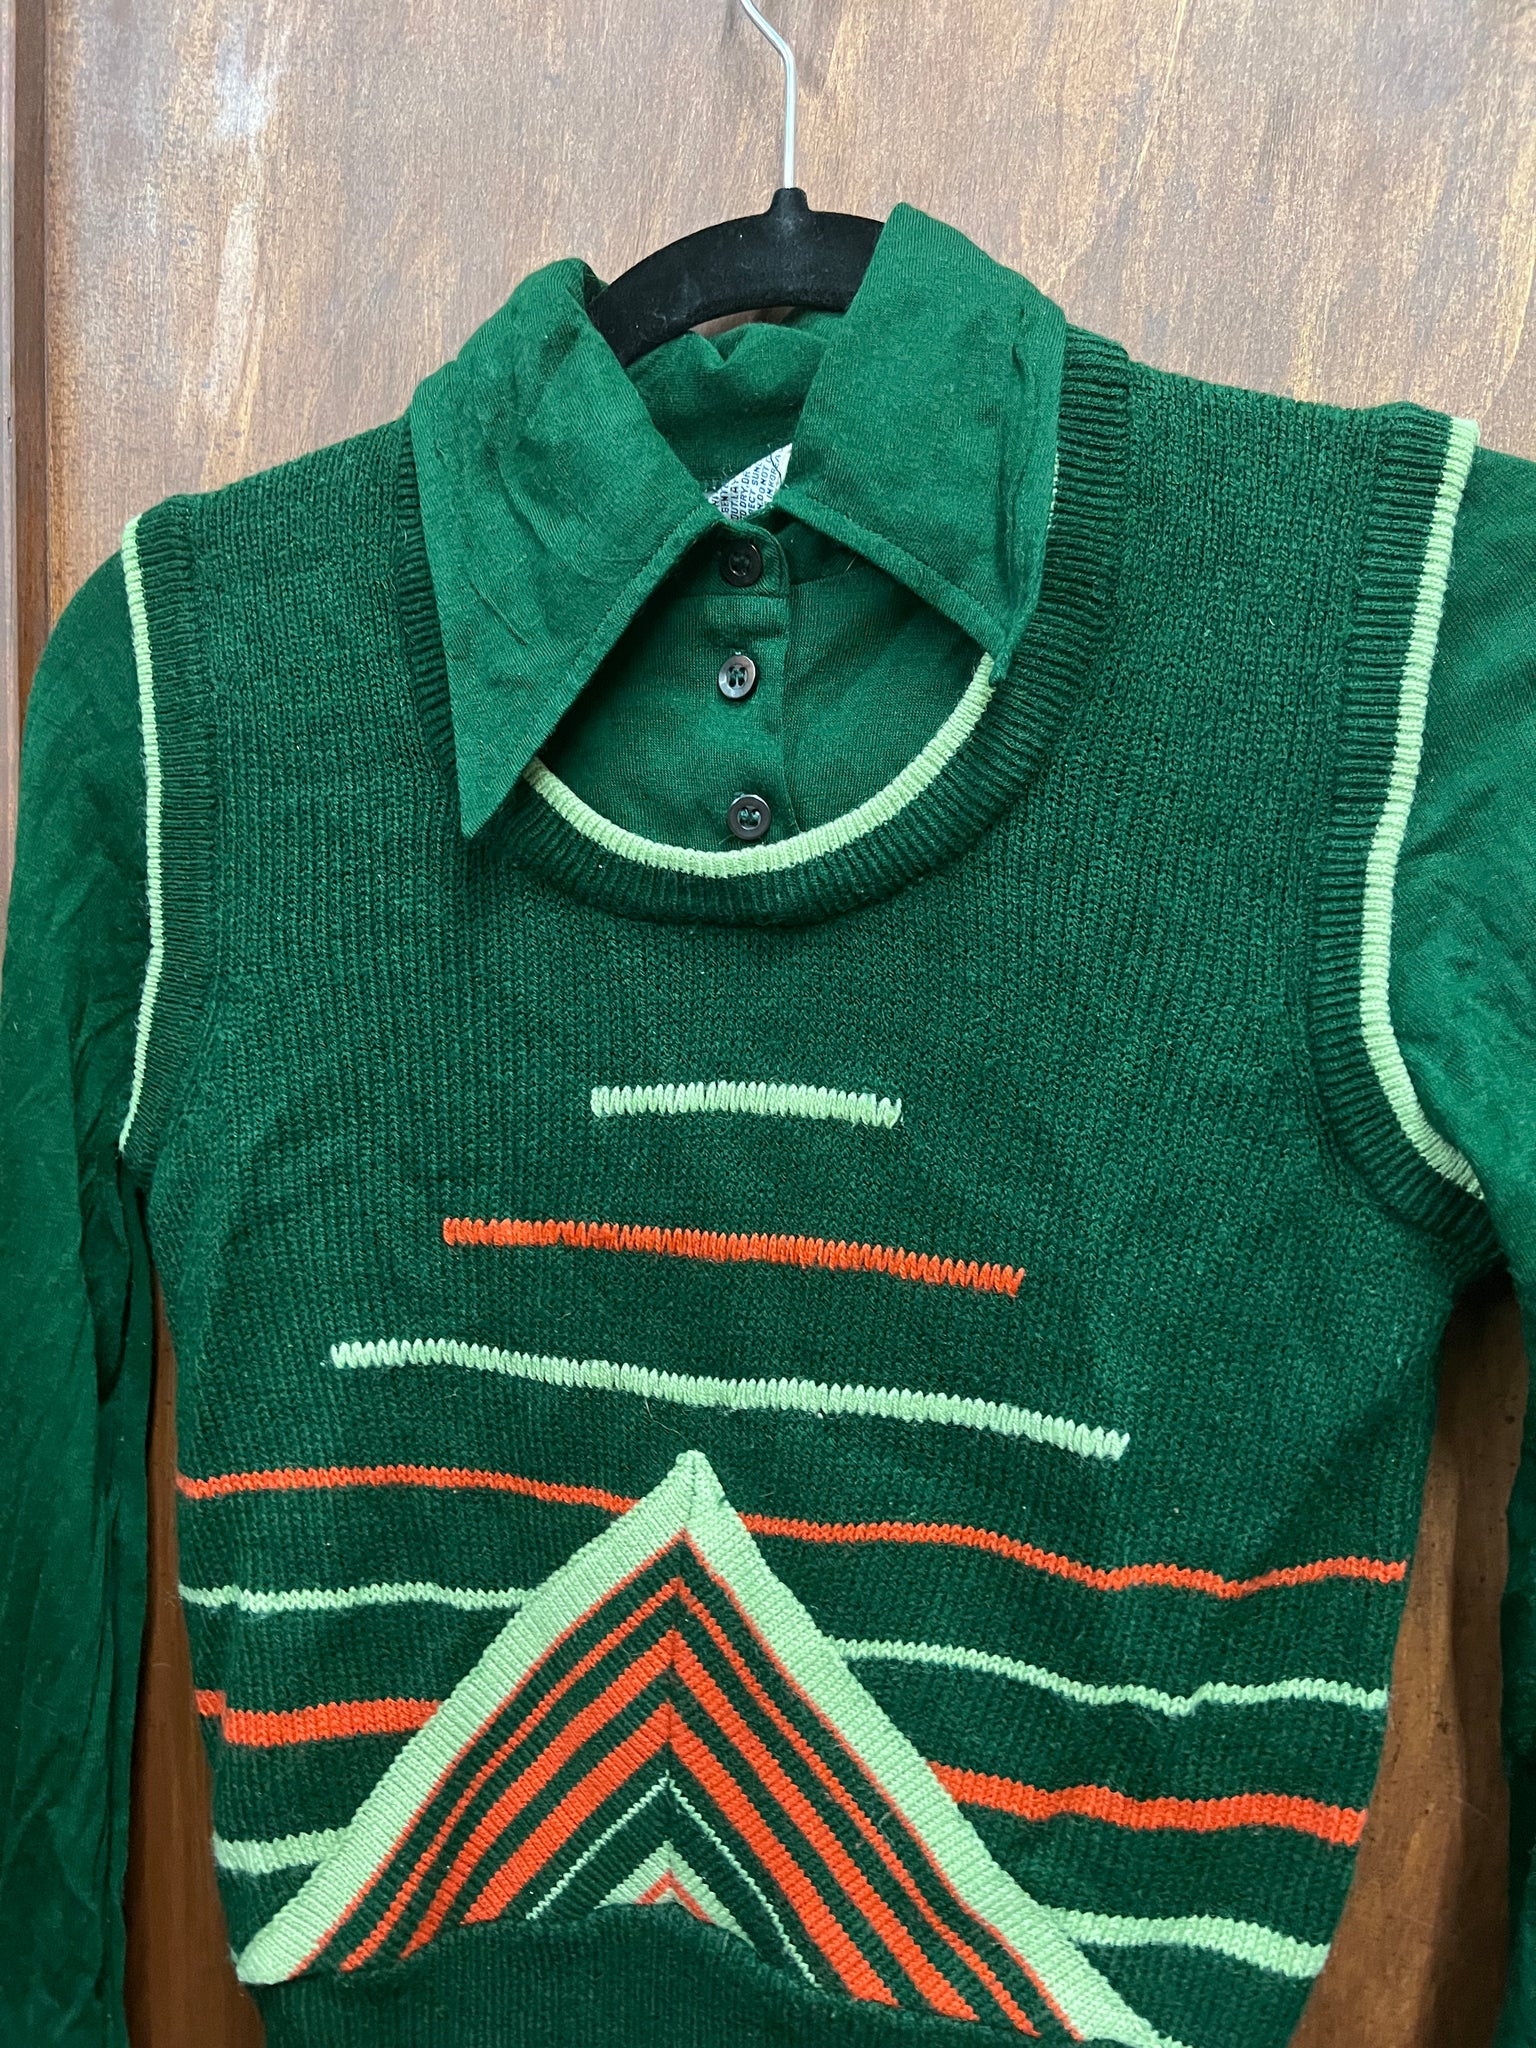 1970s-SWEATER- forest green vest w/ attached l/s shirt